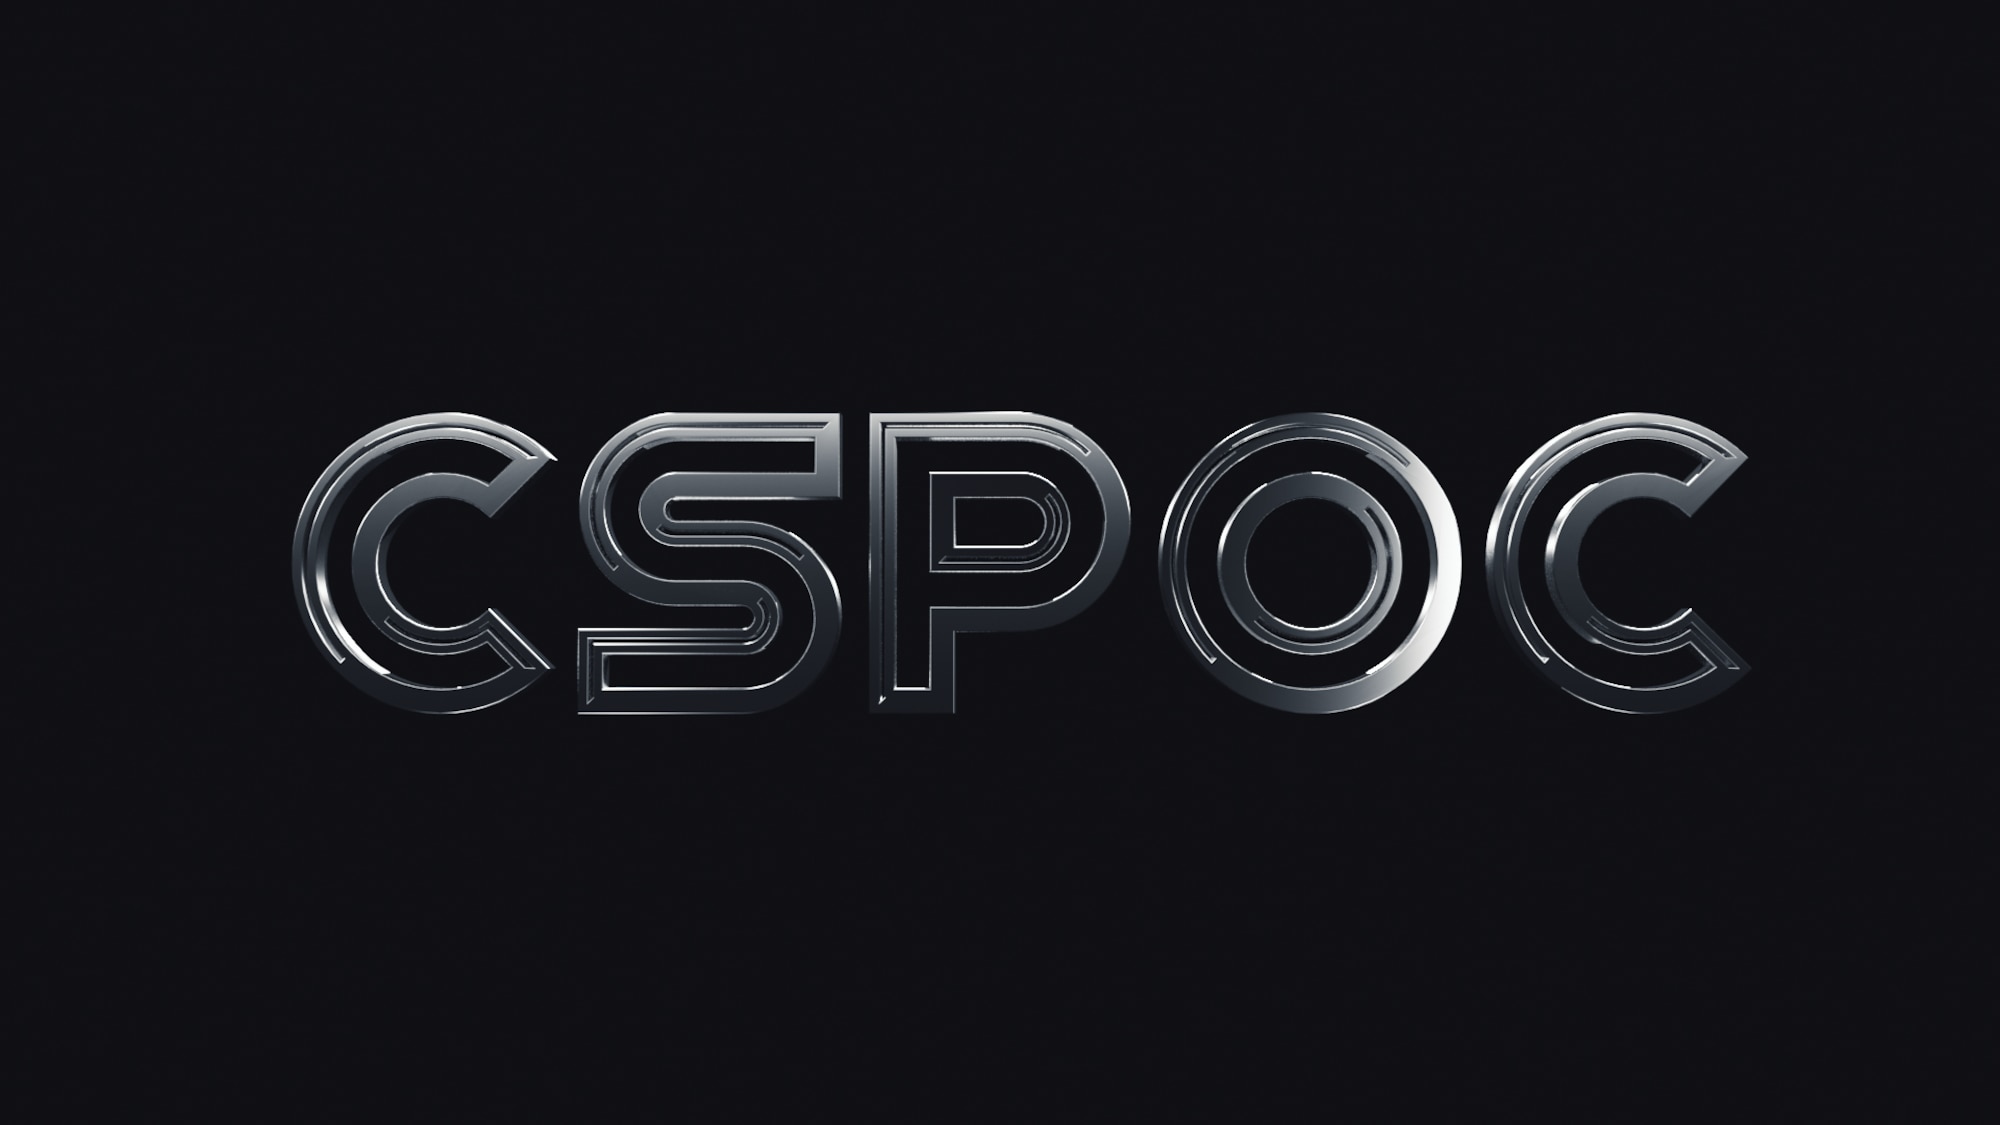 The CSpOC, which reports to the Combined Force Space Component Command executes the operational command and control of space forces to achieve theater and global objectives.